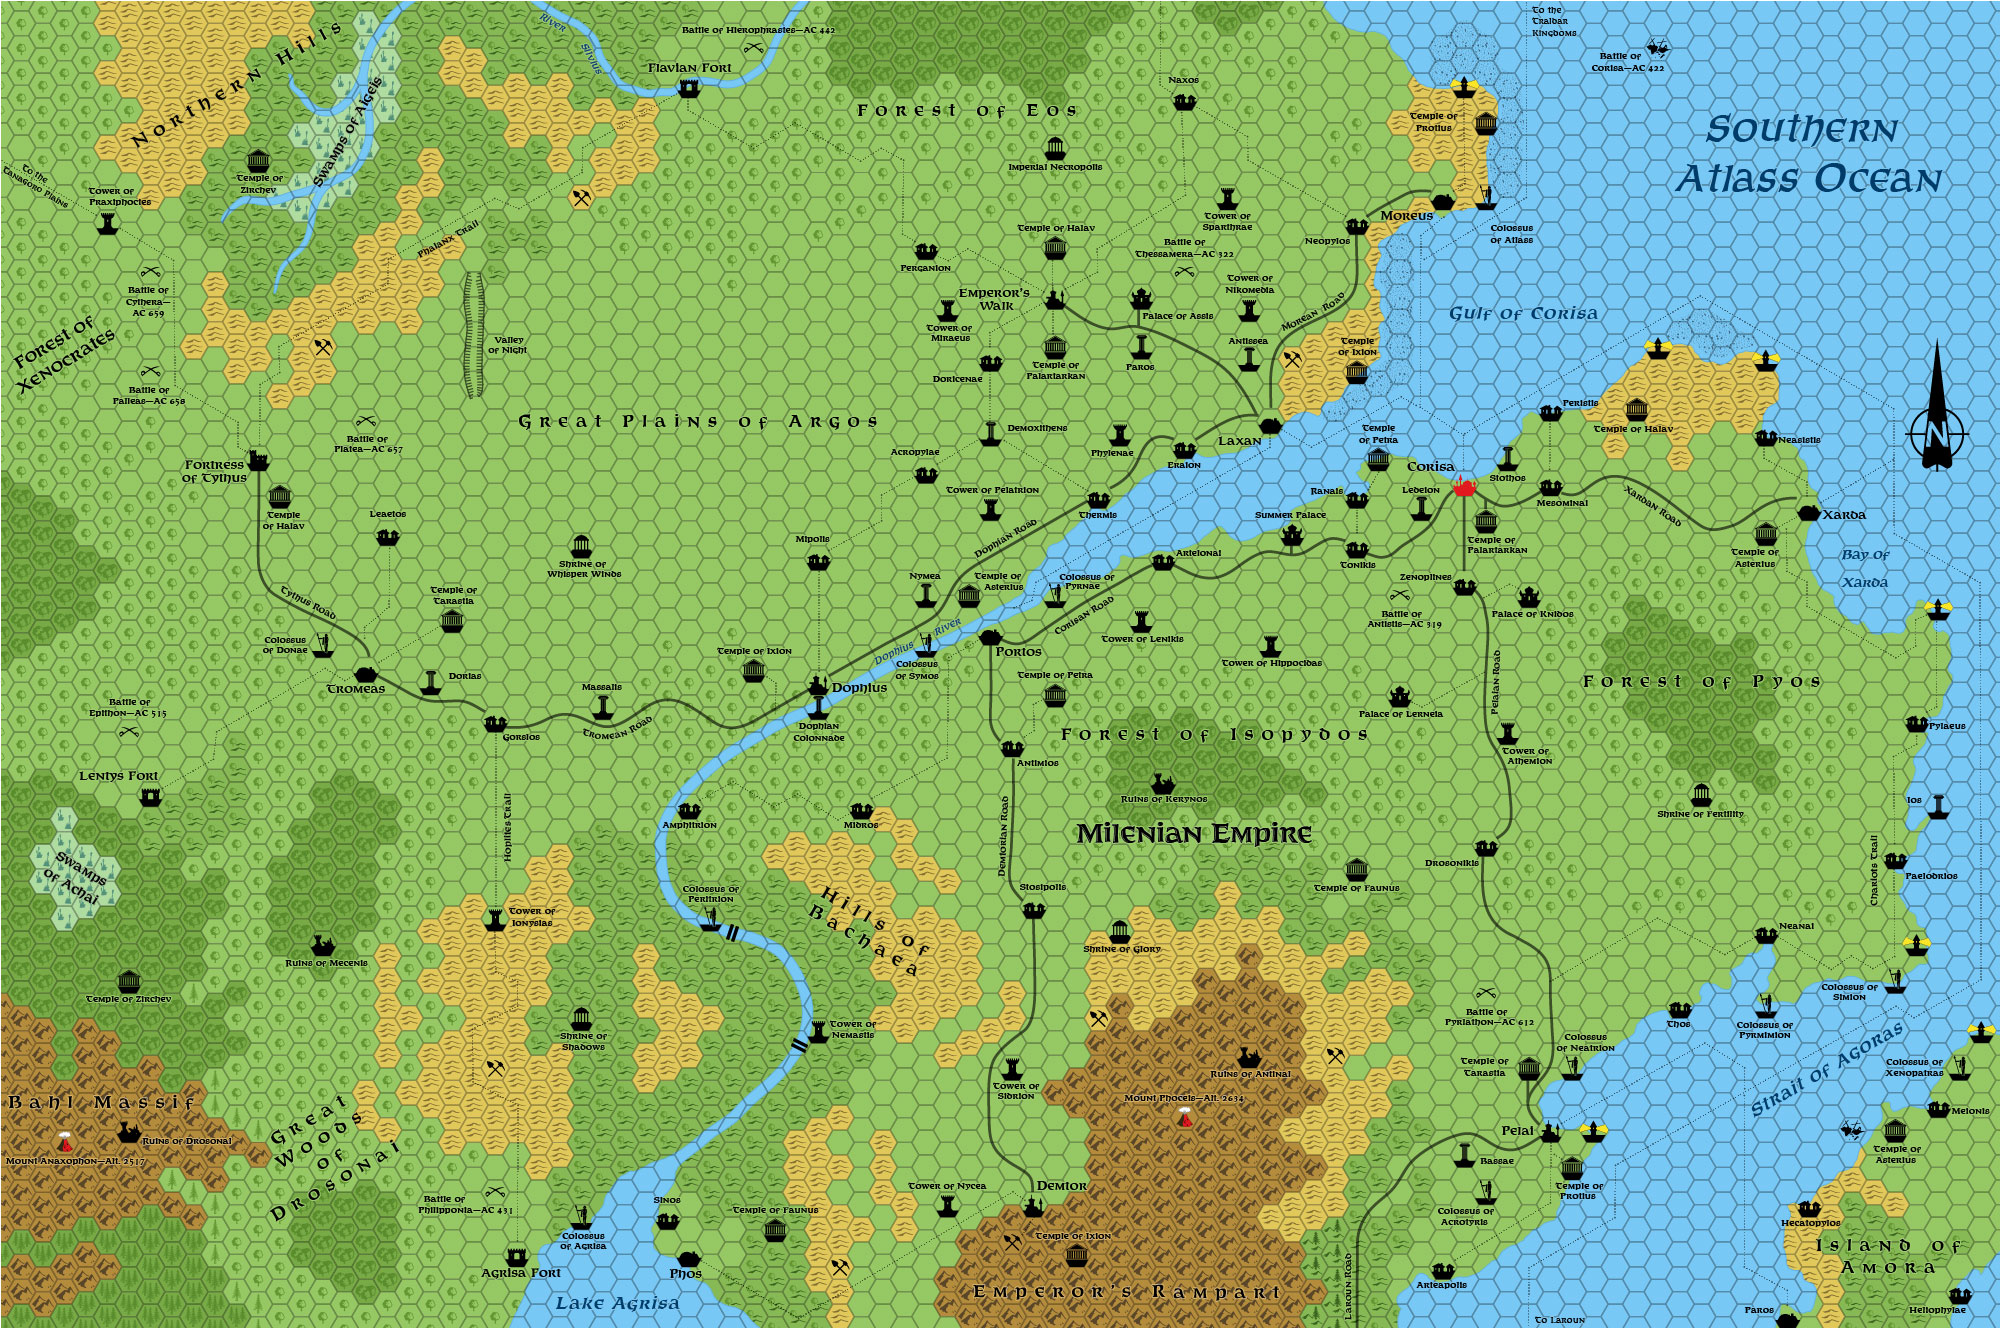 Updated map of the Milenian Empire, 8 miles per hex